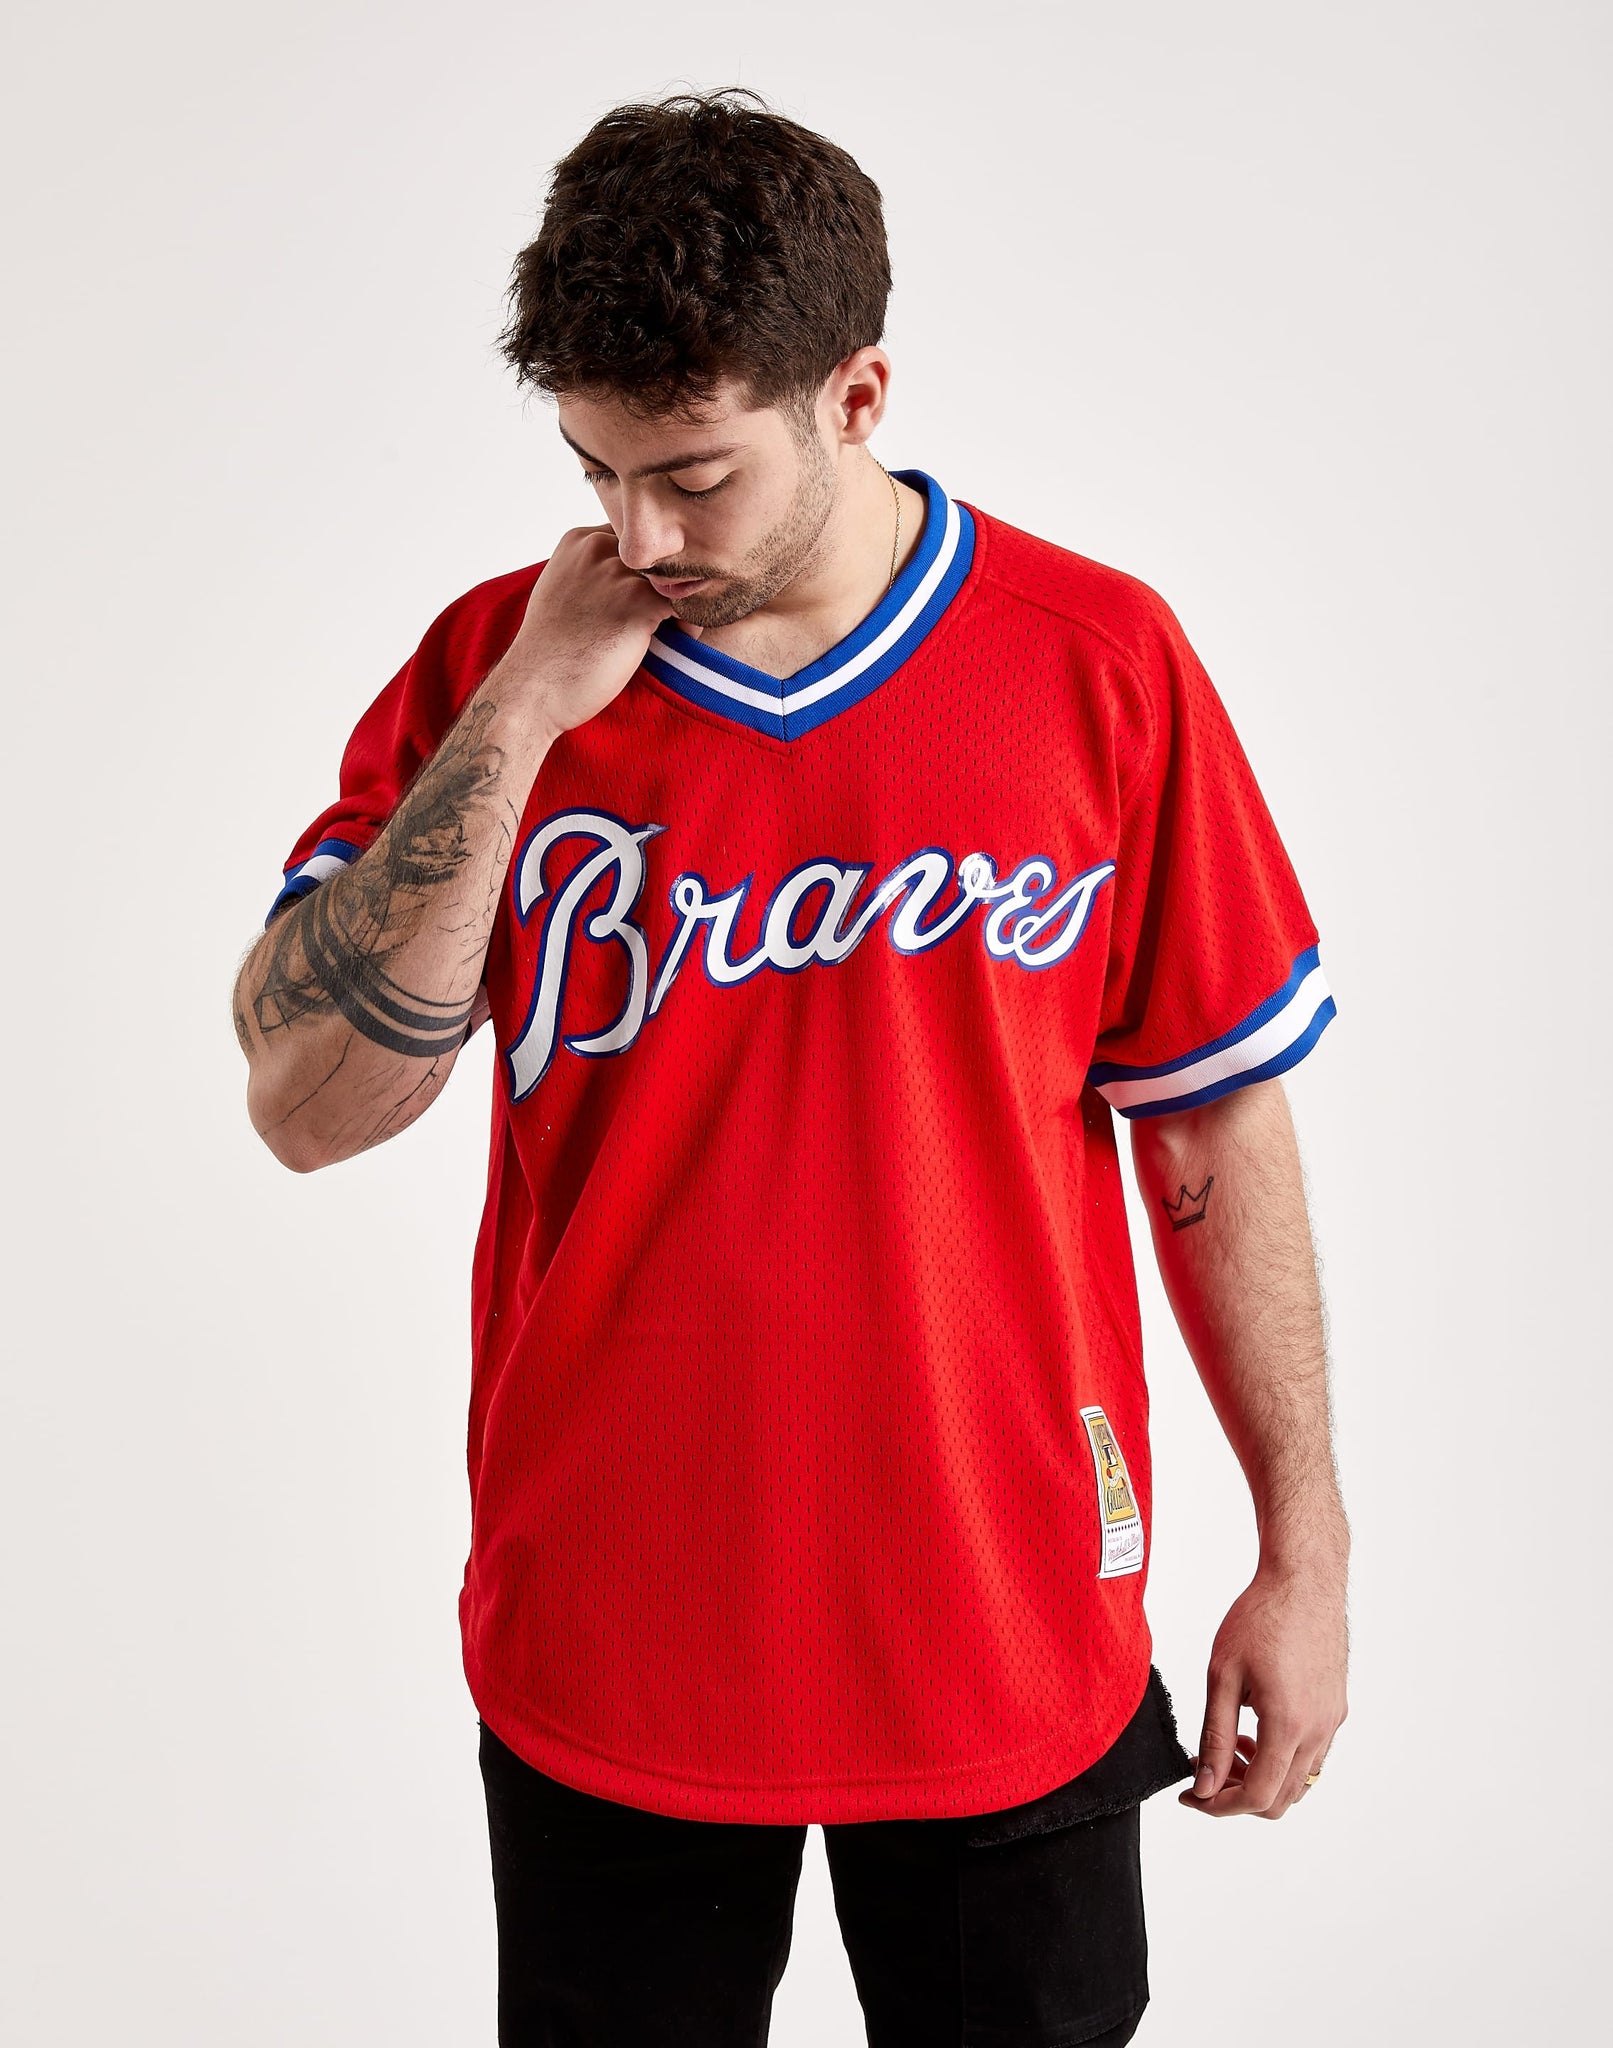 Mitchell & Ness Authentic Dale Murphy Atlanta Braves 1981 MLB Pullover  Jersey